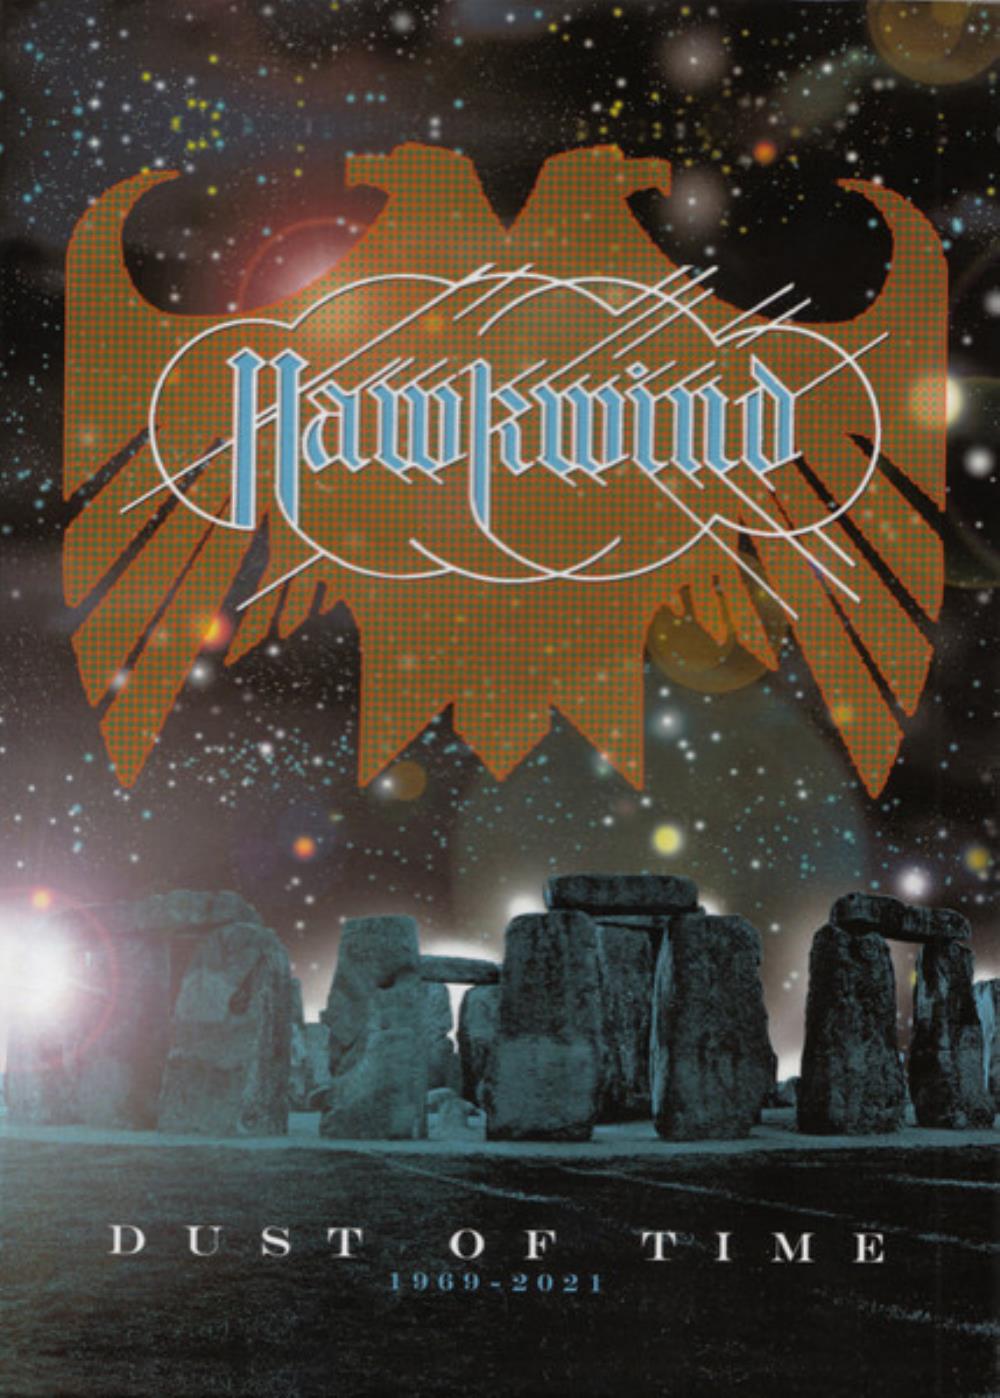 Hawkwind - Dust of Time: 1969-2021 [6CD edition] CD (album) cover